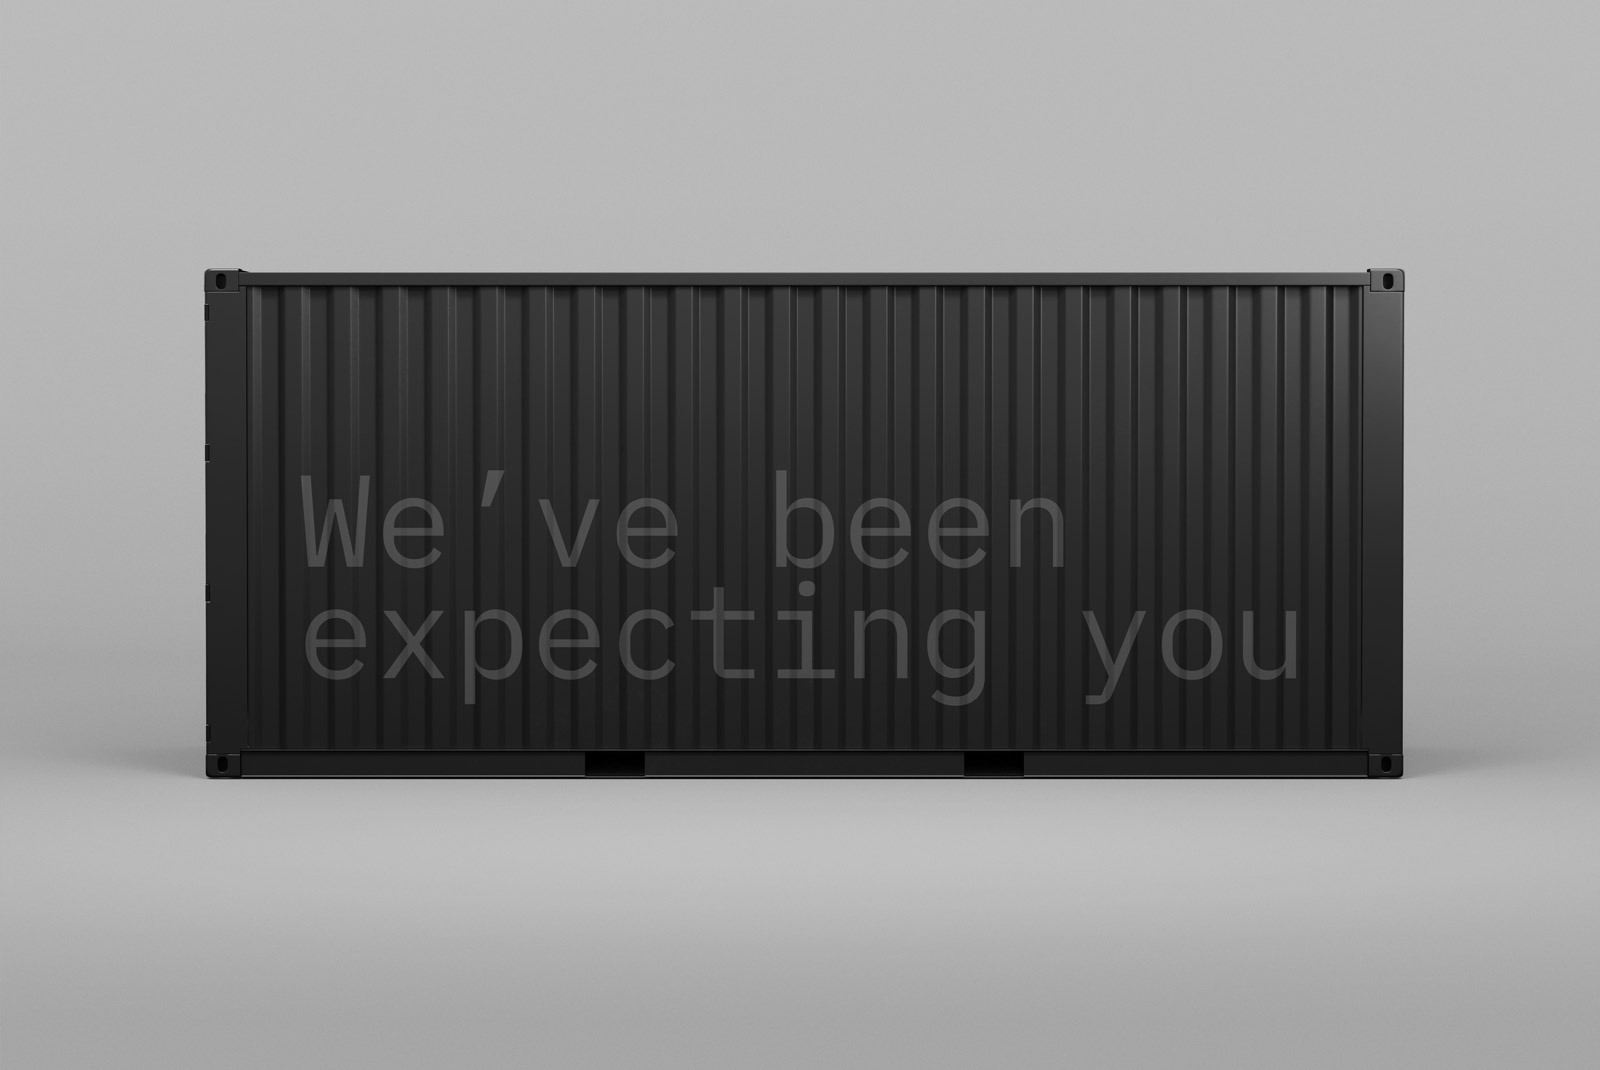 Realistic cargo container mockup with the text We've been expecting you on a grey background suitable for designers' product presentation.